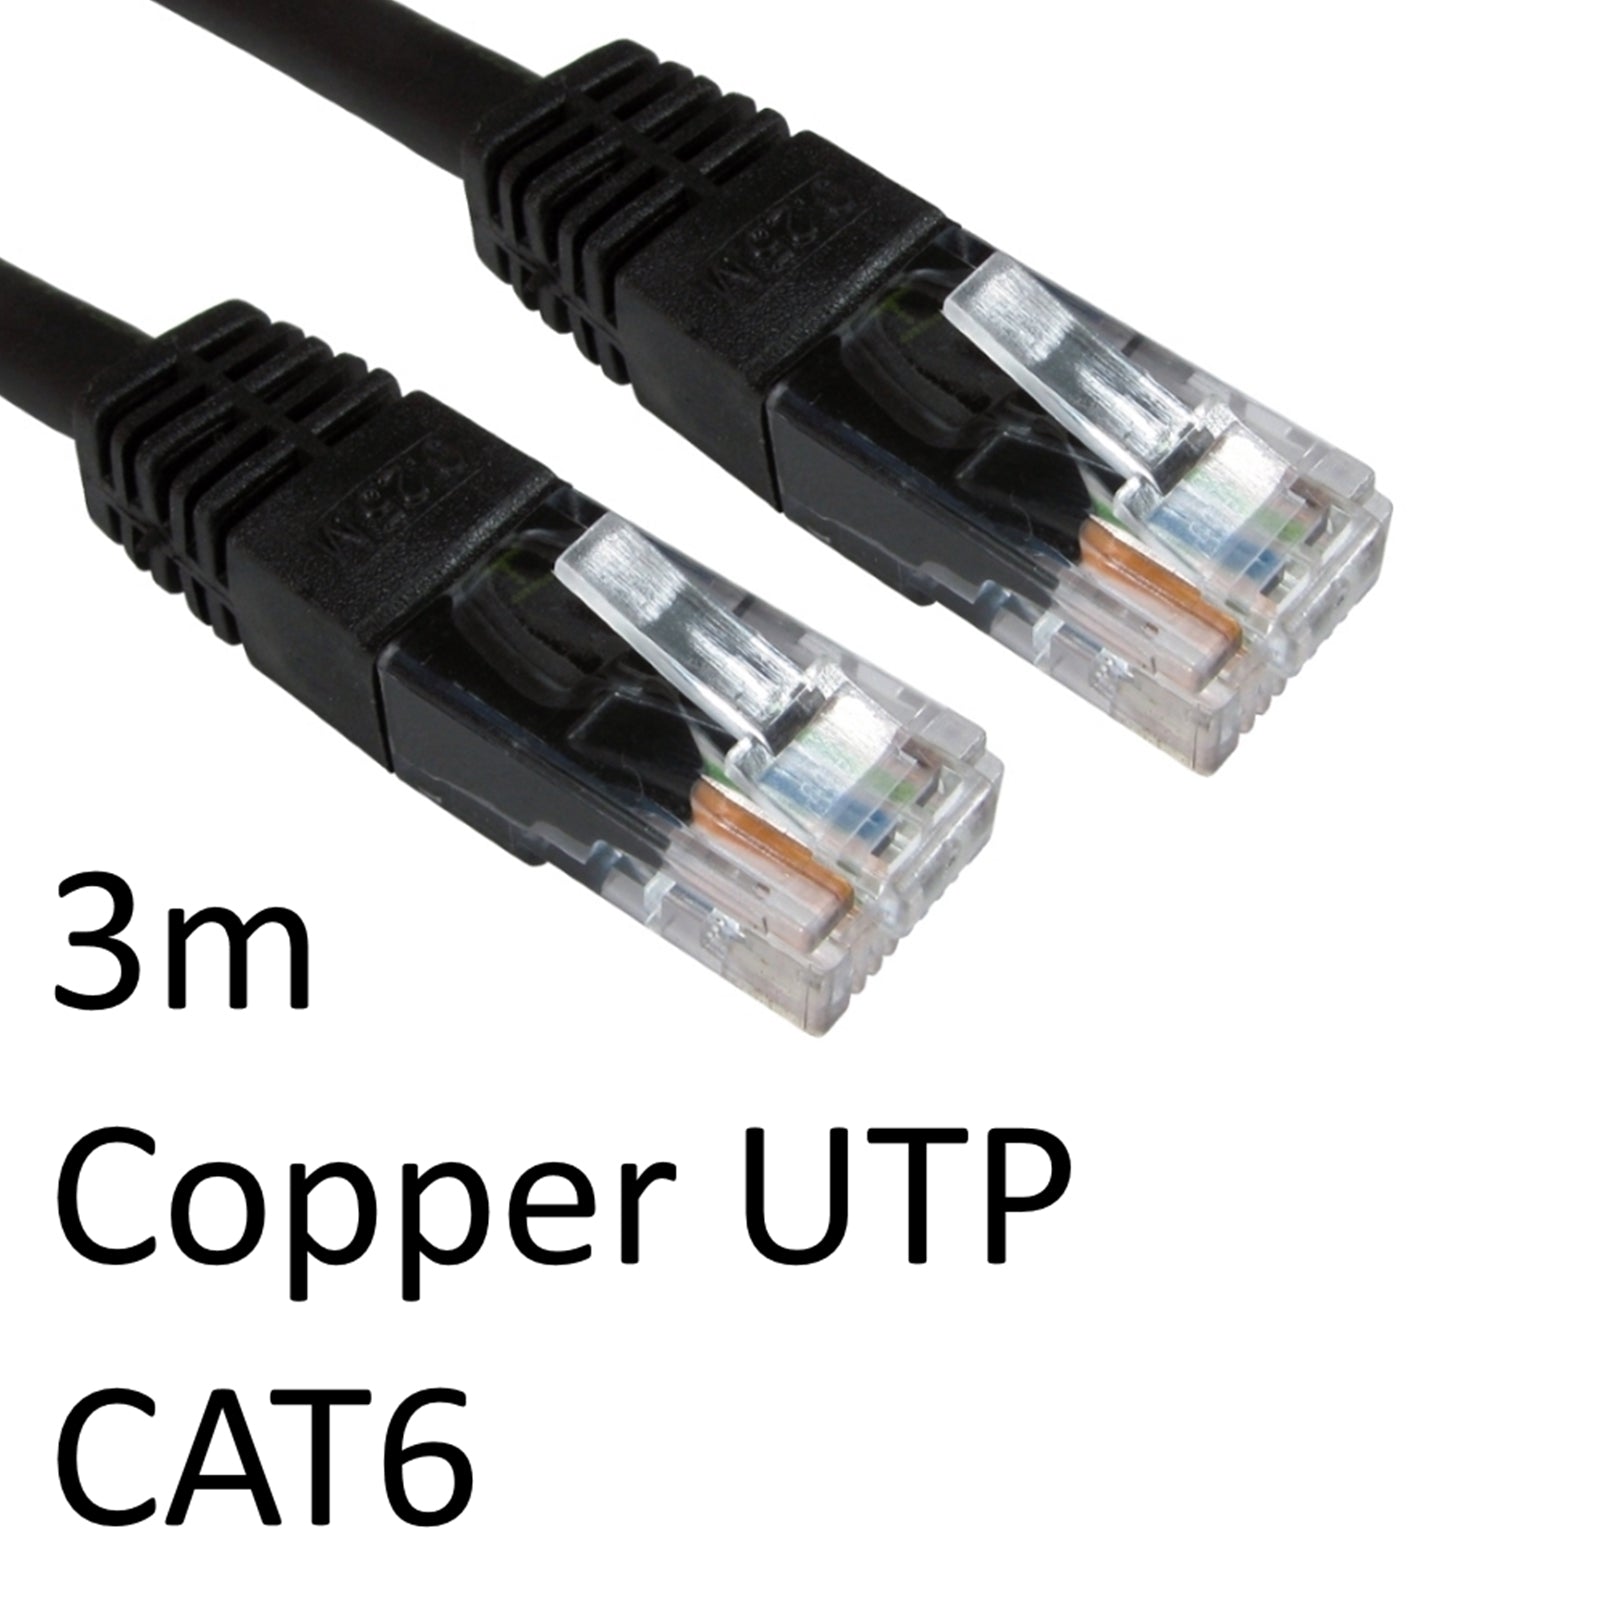 RJ45 (M) to RJ45 (M) CAT6 Moulded Boot Copper UTP 3 Metre Networking Cable Black